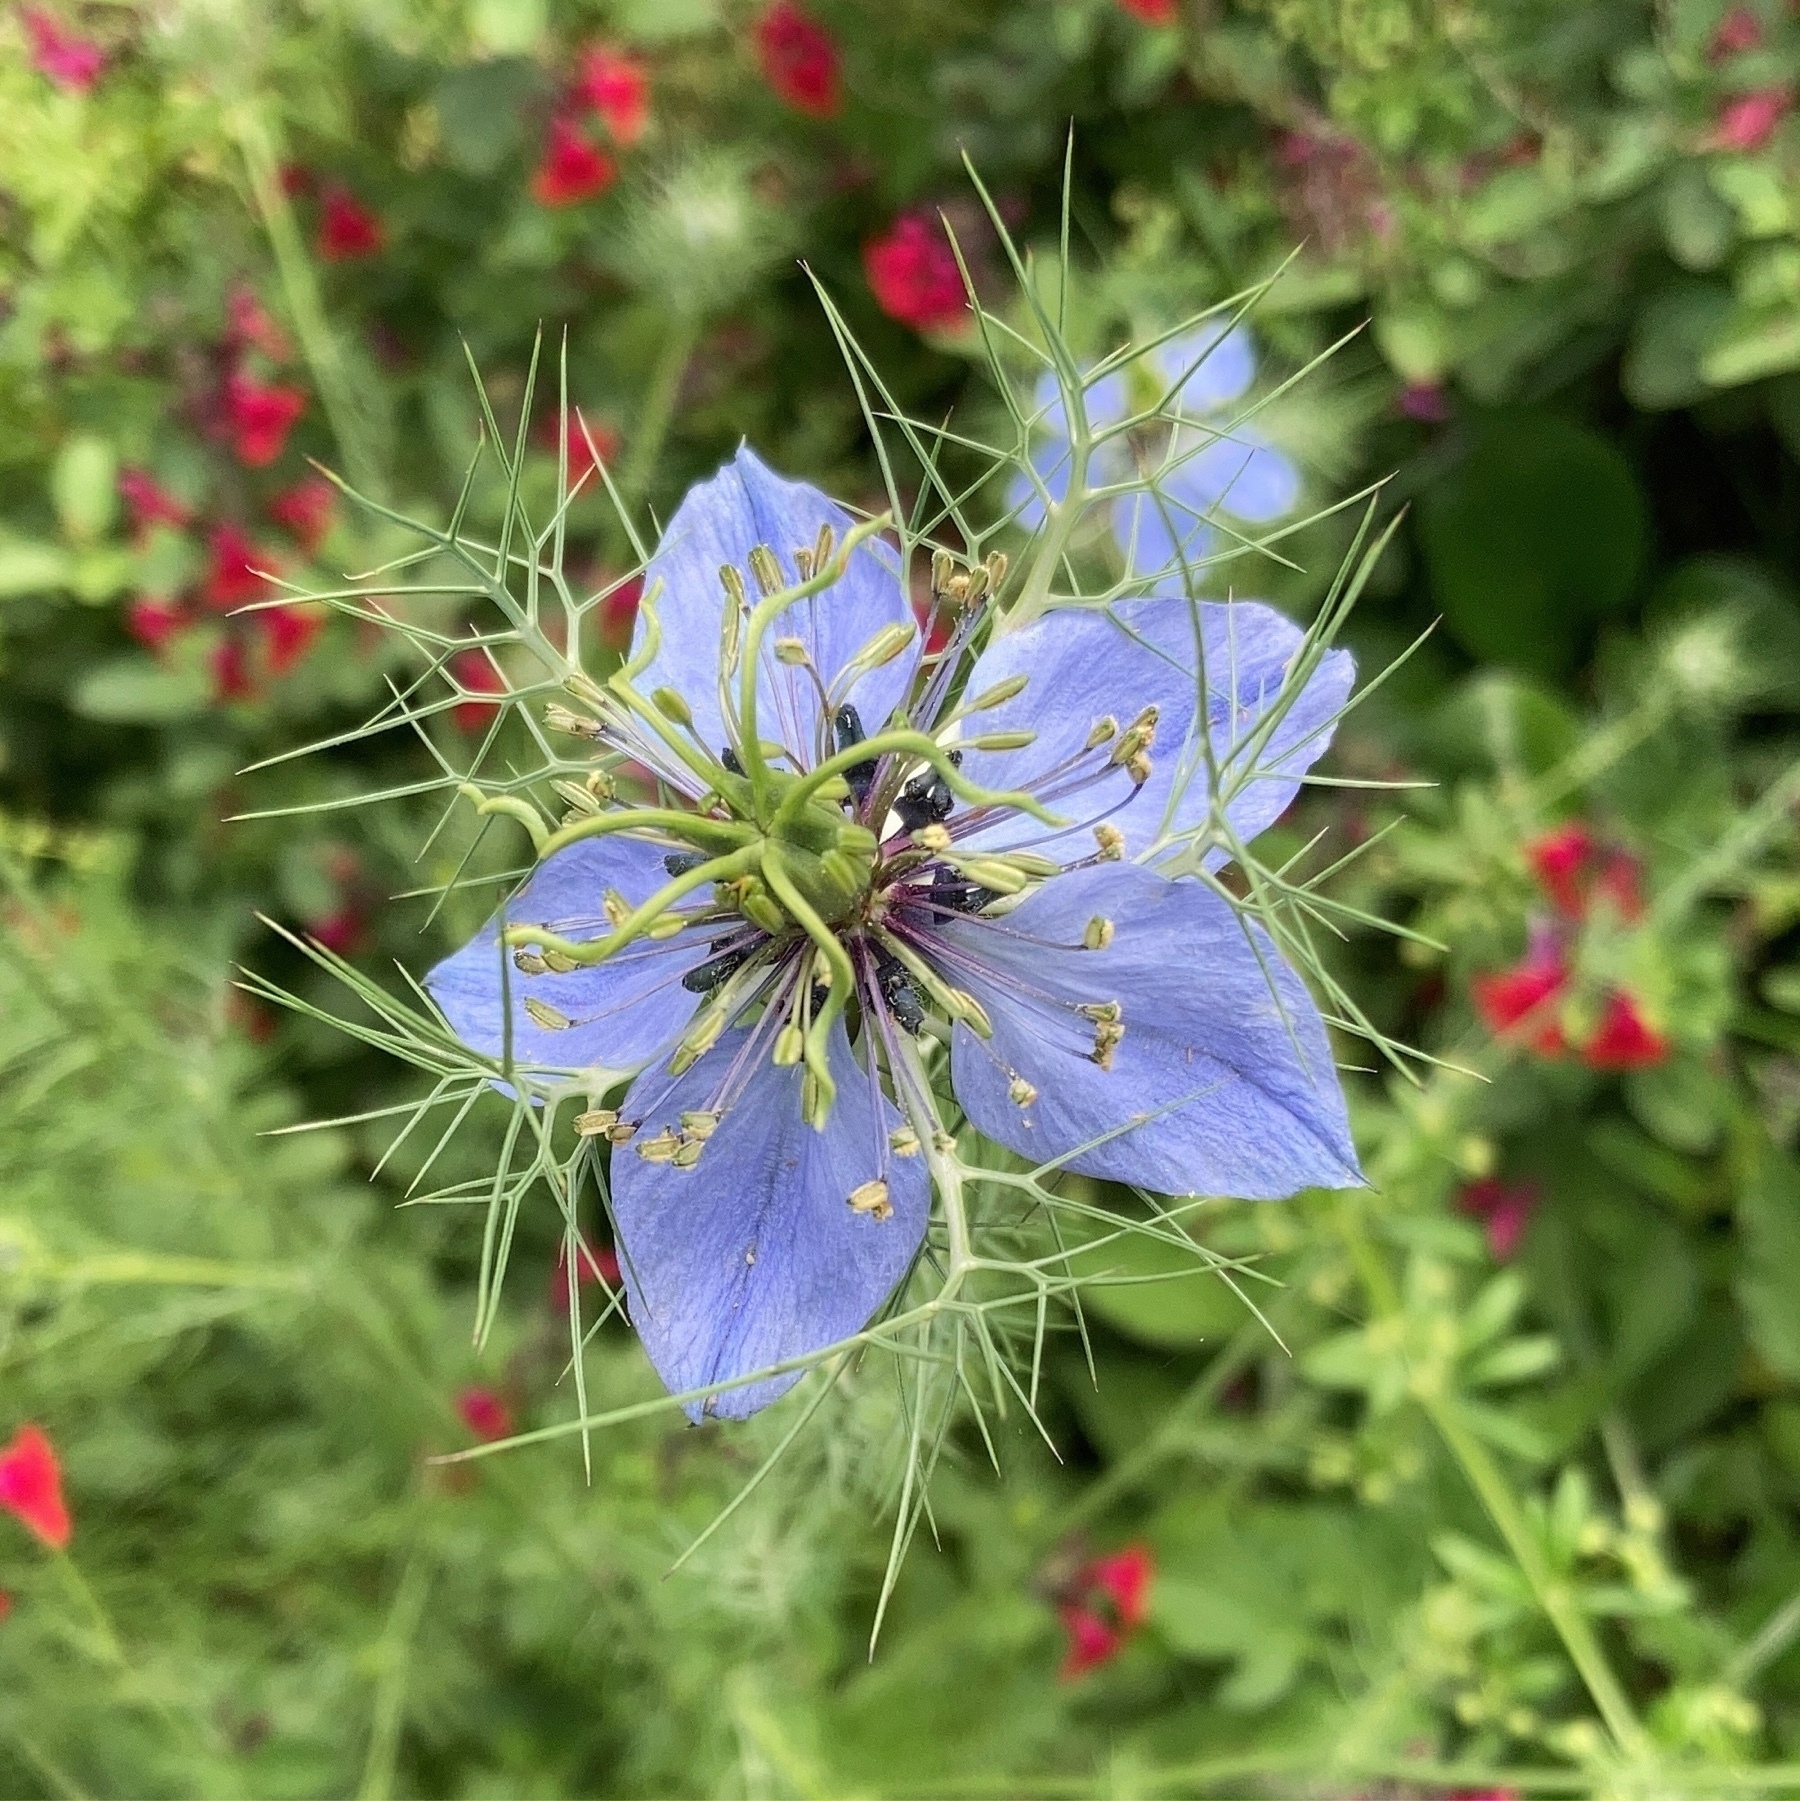 pale blue flower, five petals, flowing stamens and frondy stems and leaves